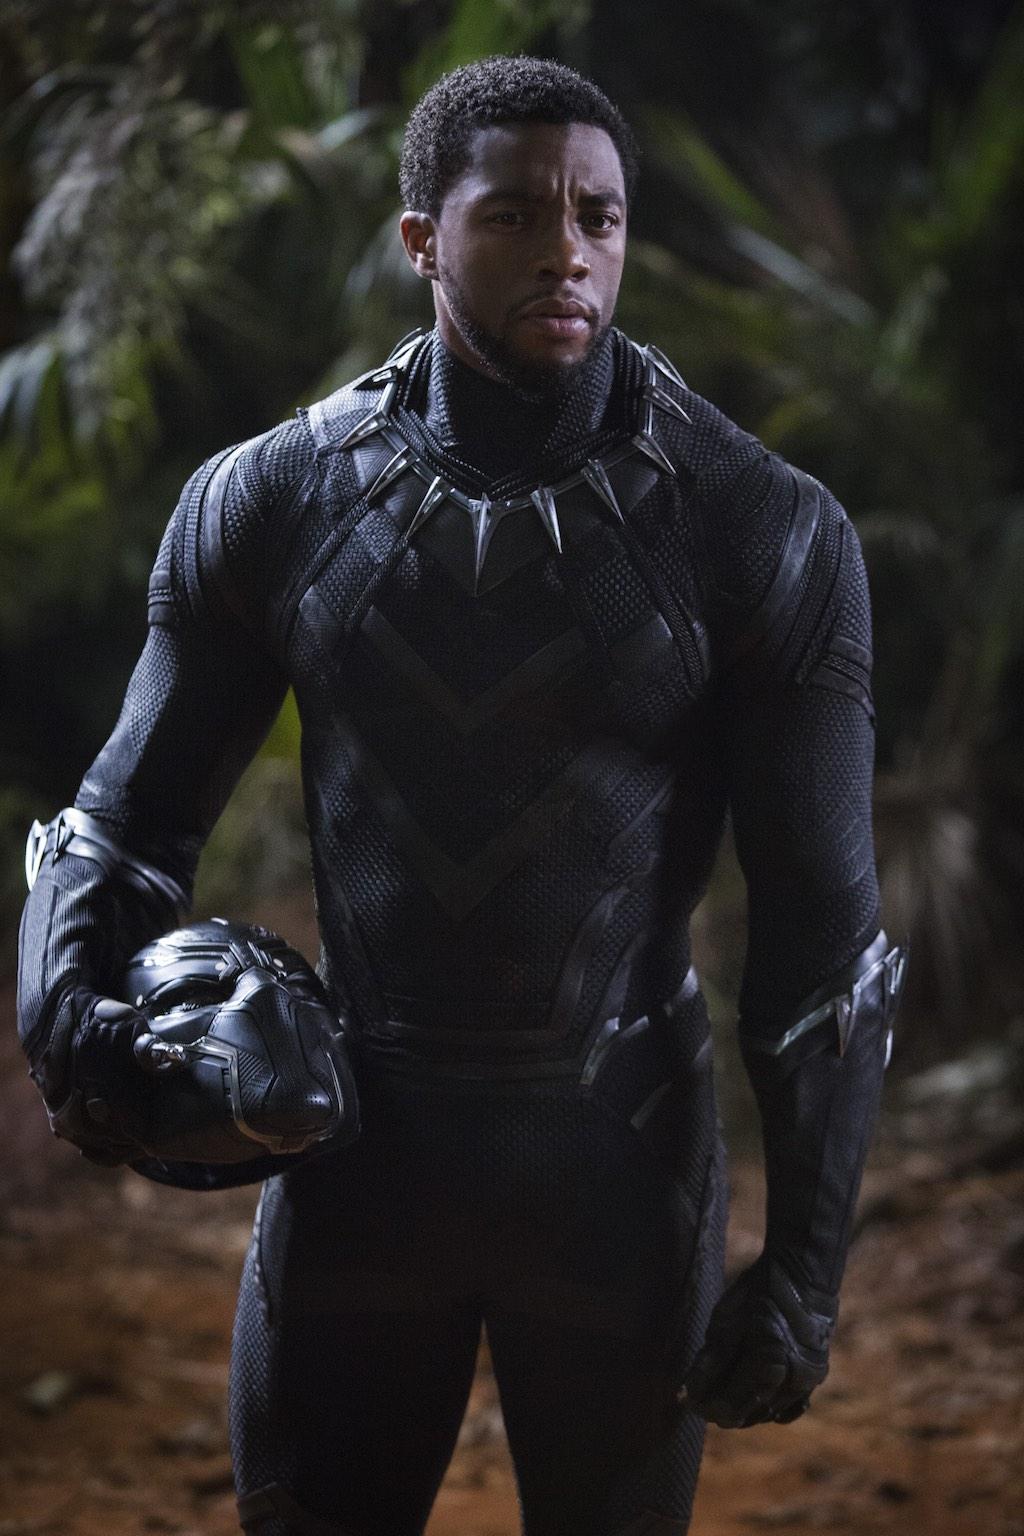 Black Panther: Welcome to Wakanda - Fashion and Costume Design in Focus